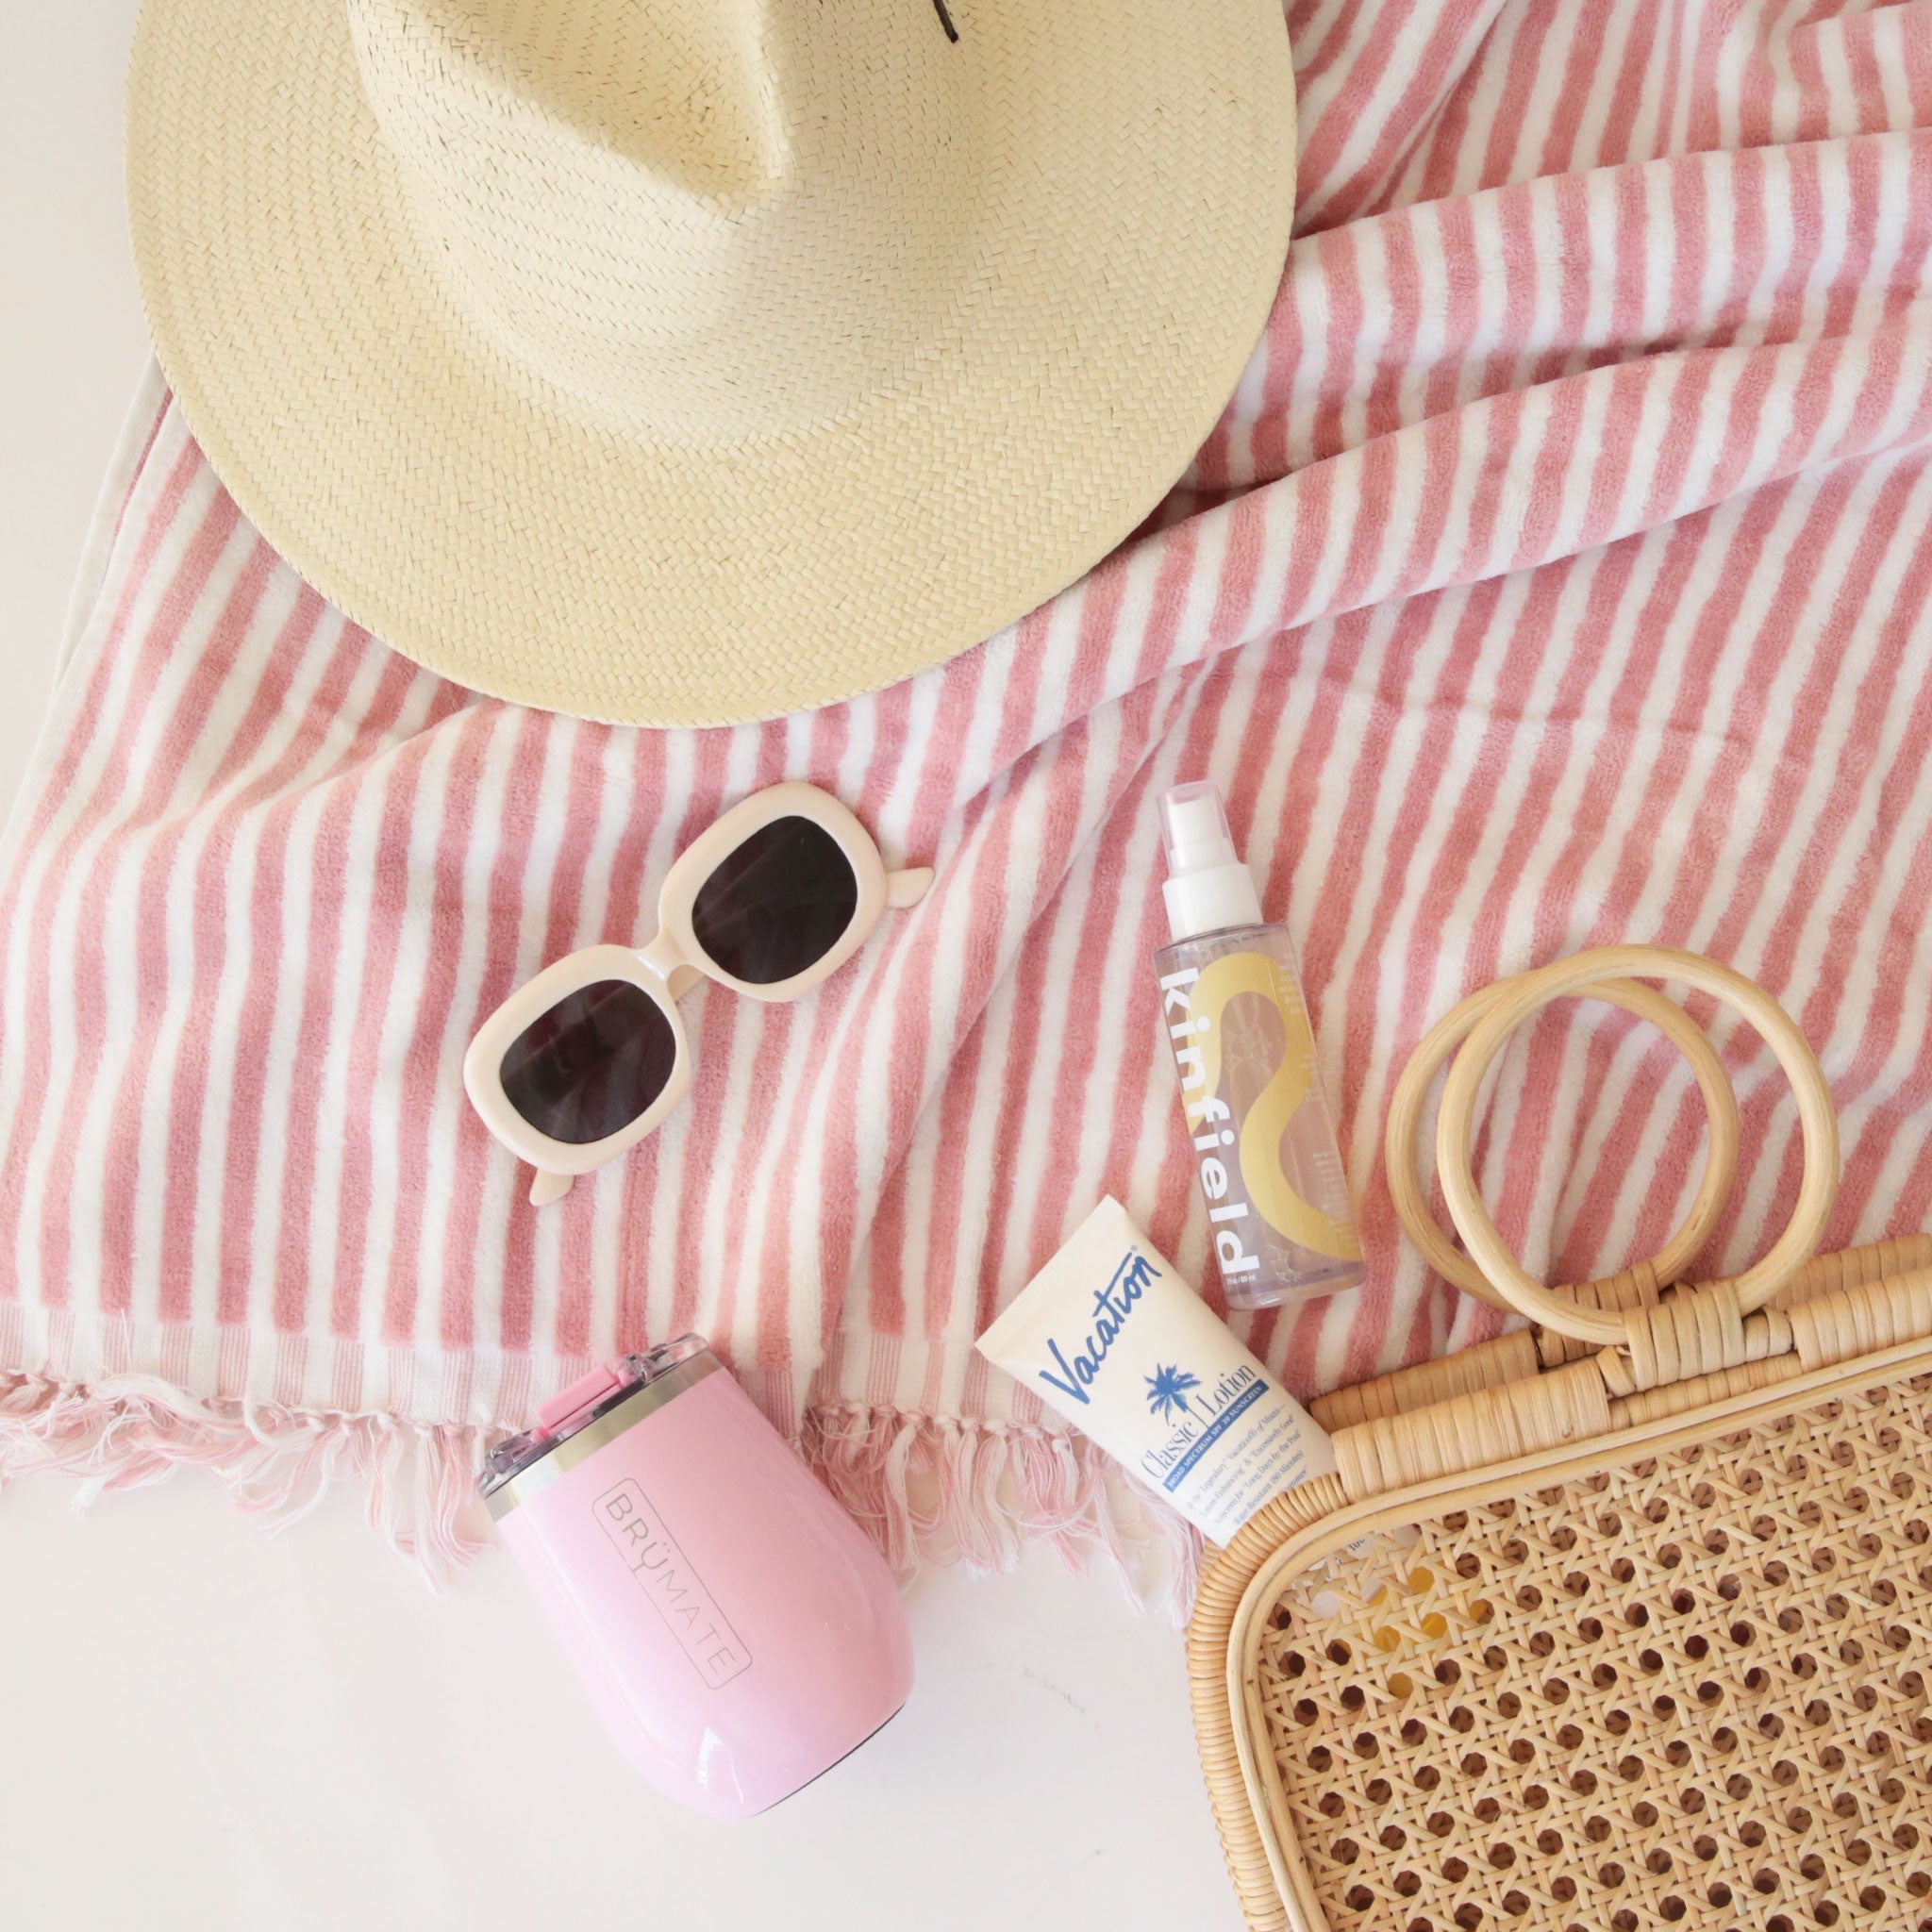 a woven tote, sunscreen, pink wine tumbler, beige vintage sunglasses and a straw hat sit on a white and pink striped beach towel